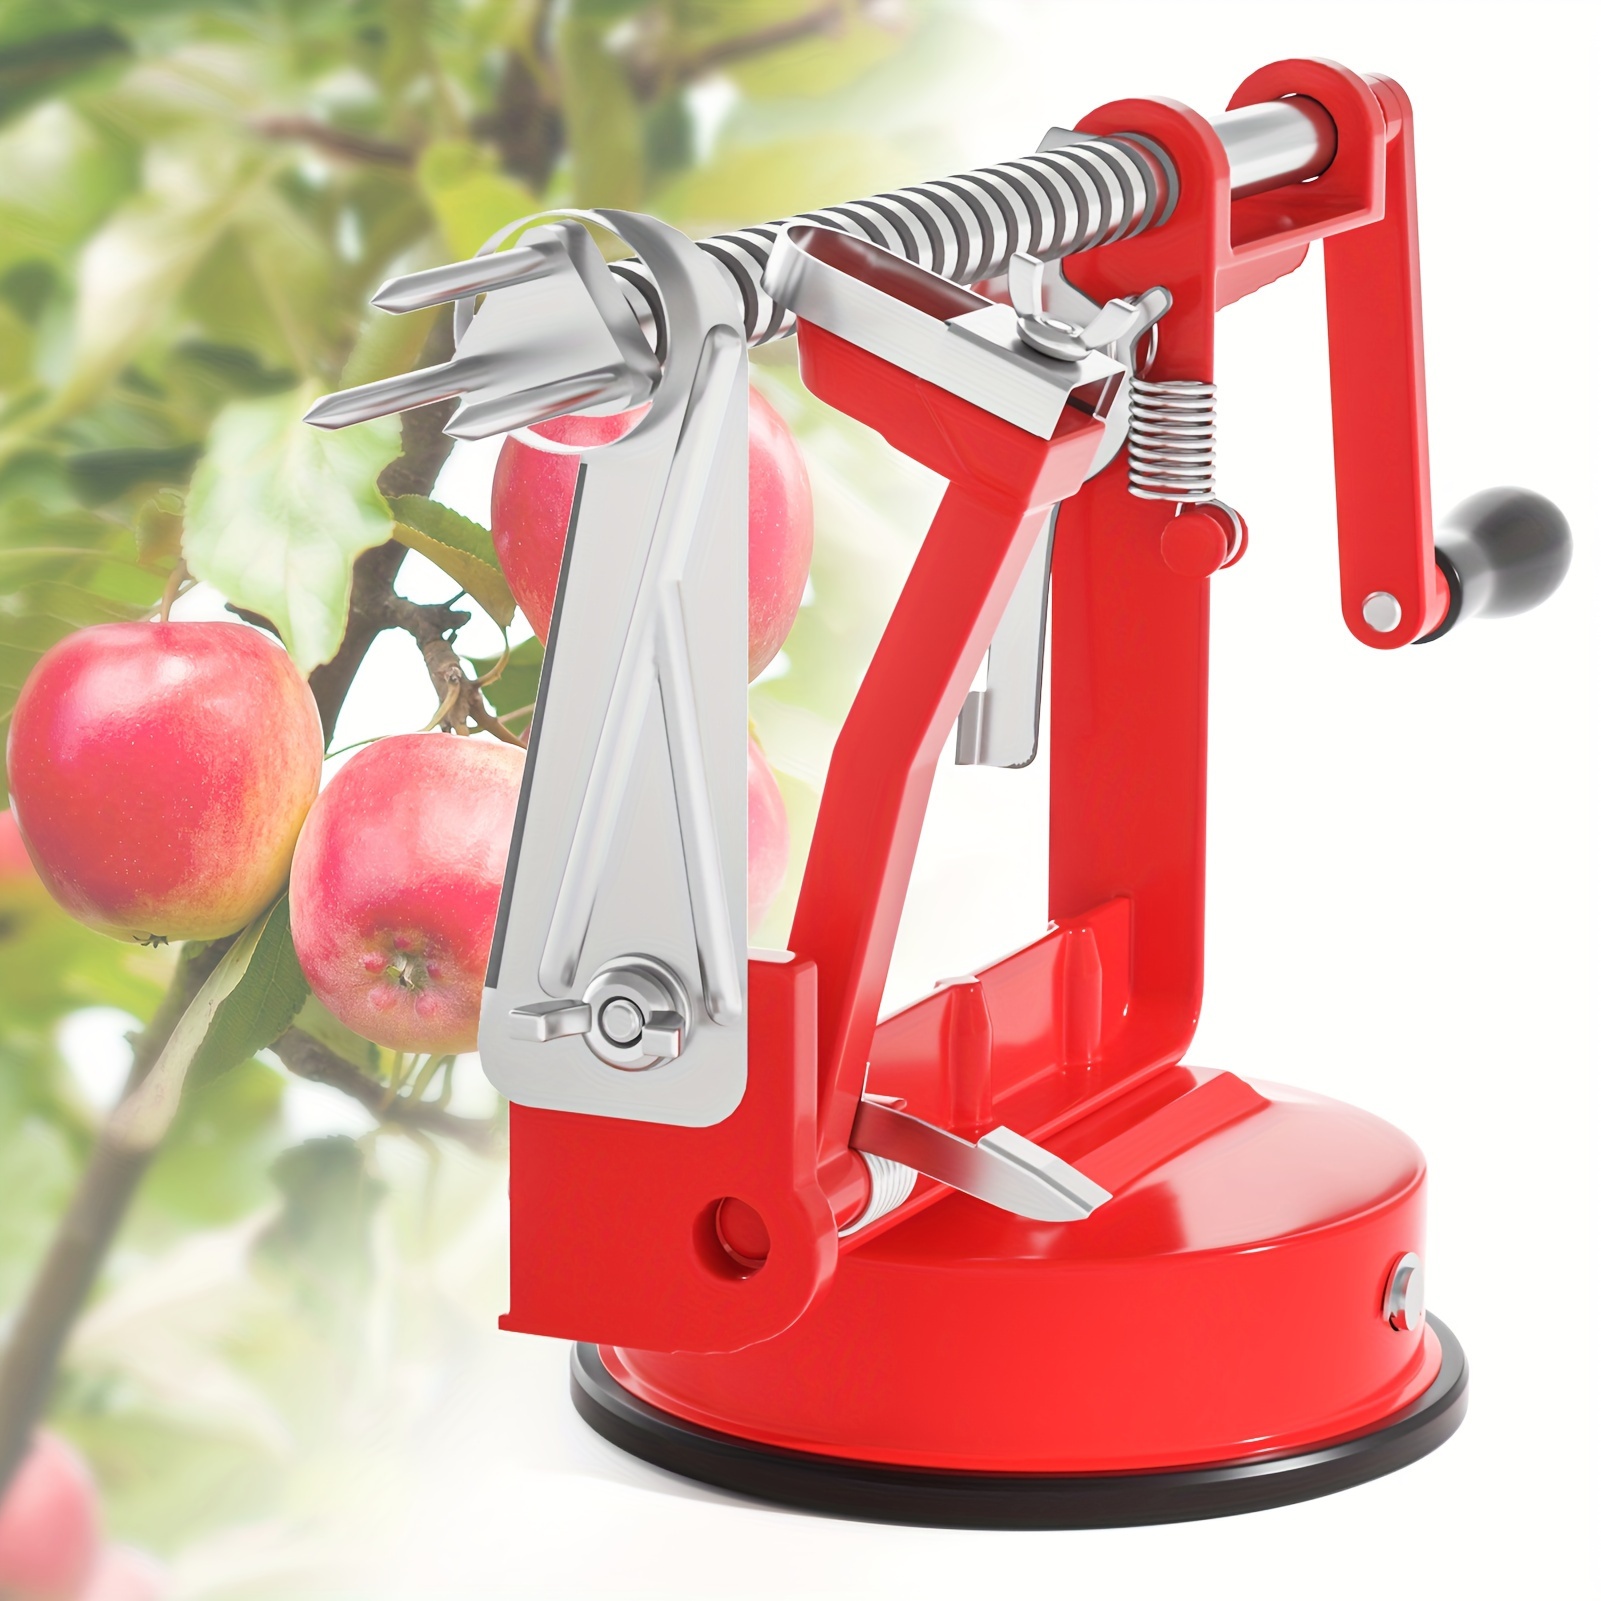 

1pc, Ookuu Peeler Corer 3 In 1 Peeler Slicer Corer With Powerful Suction Base And Stainless Steel Blades